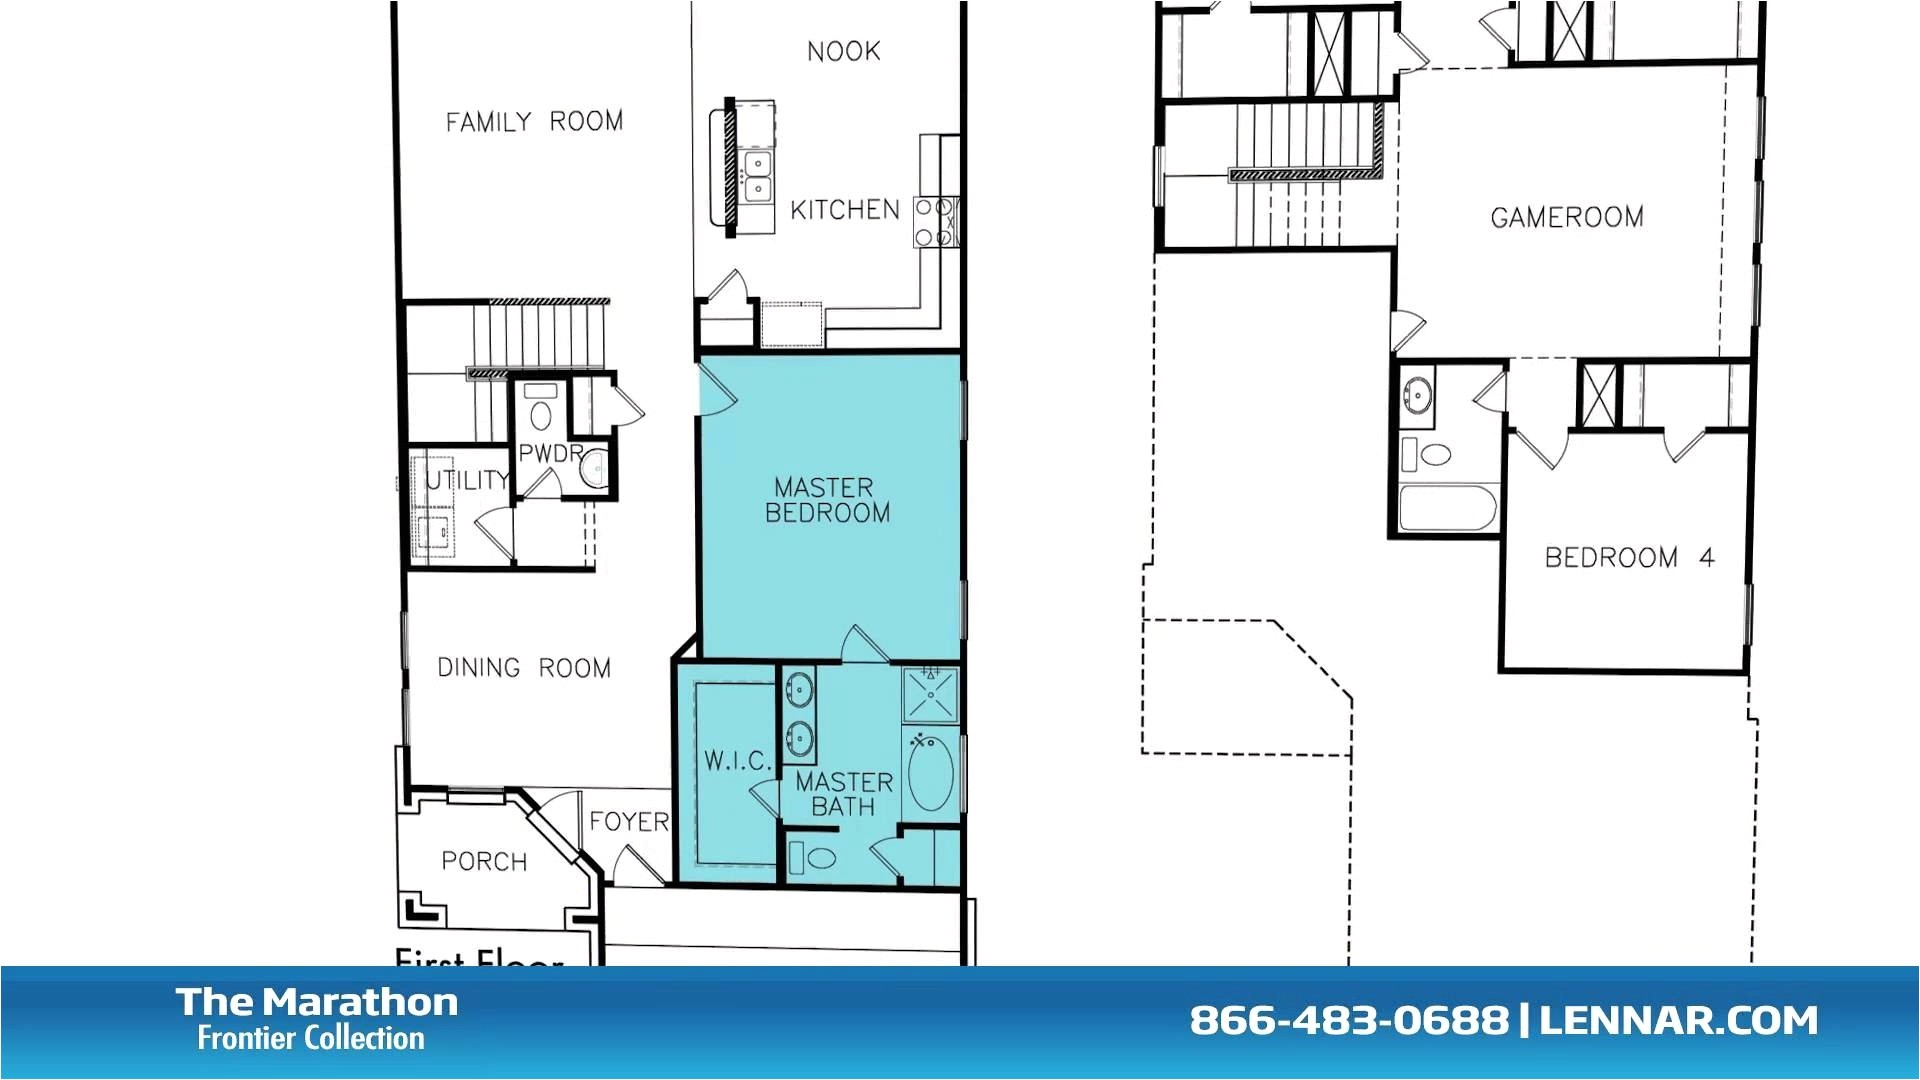 parade of homes floor plans lovely parade of homes